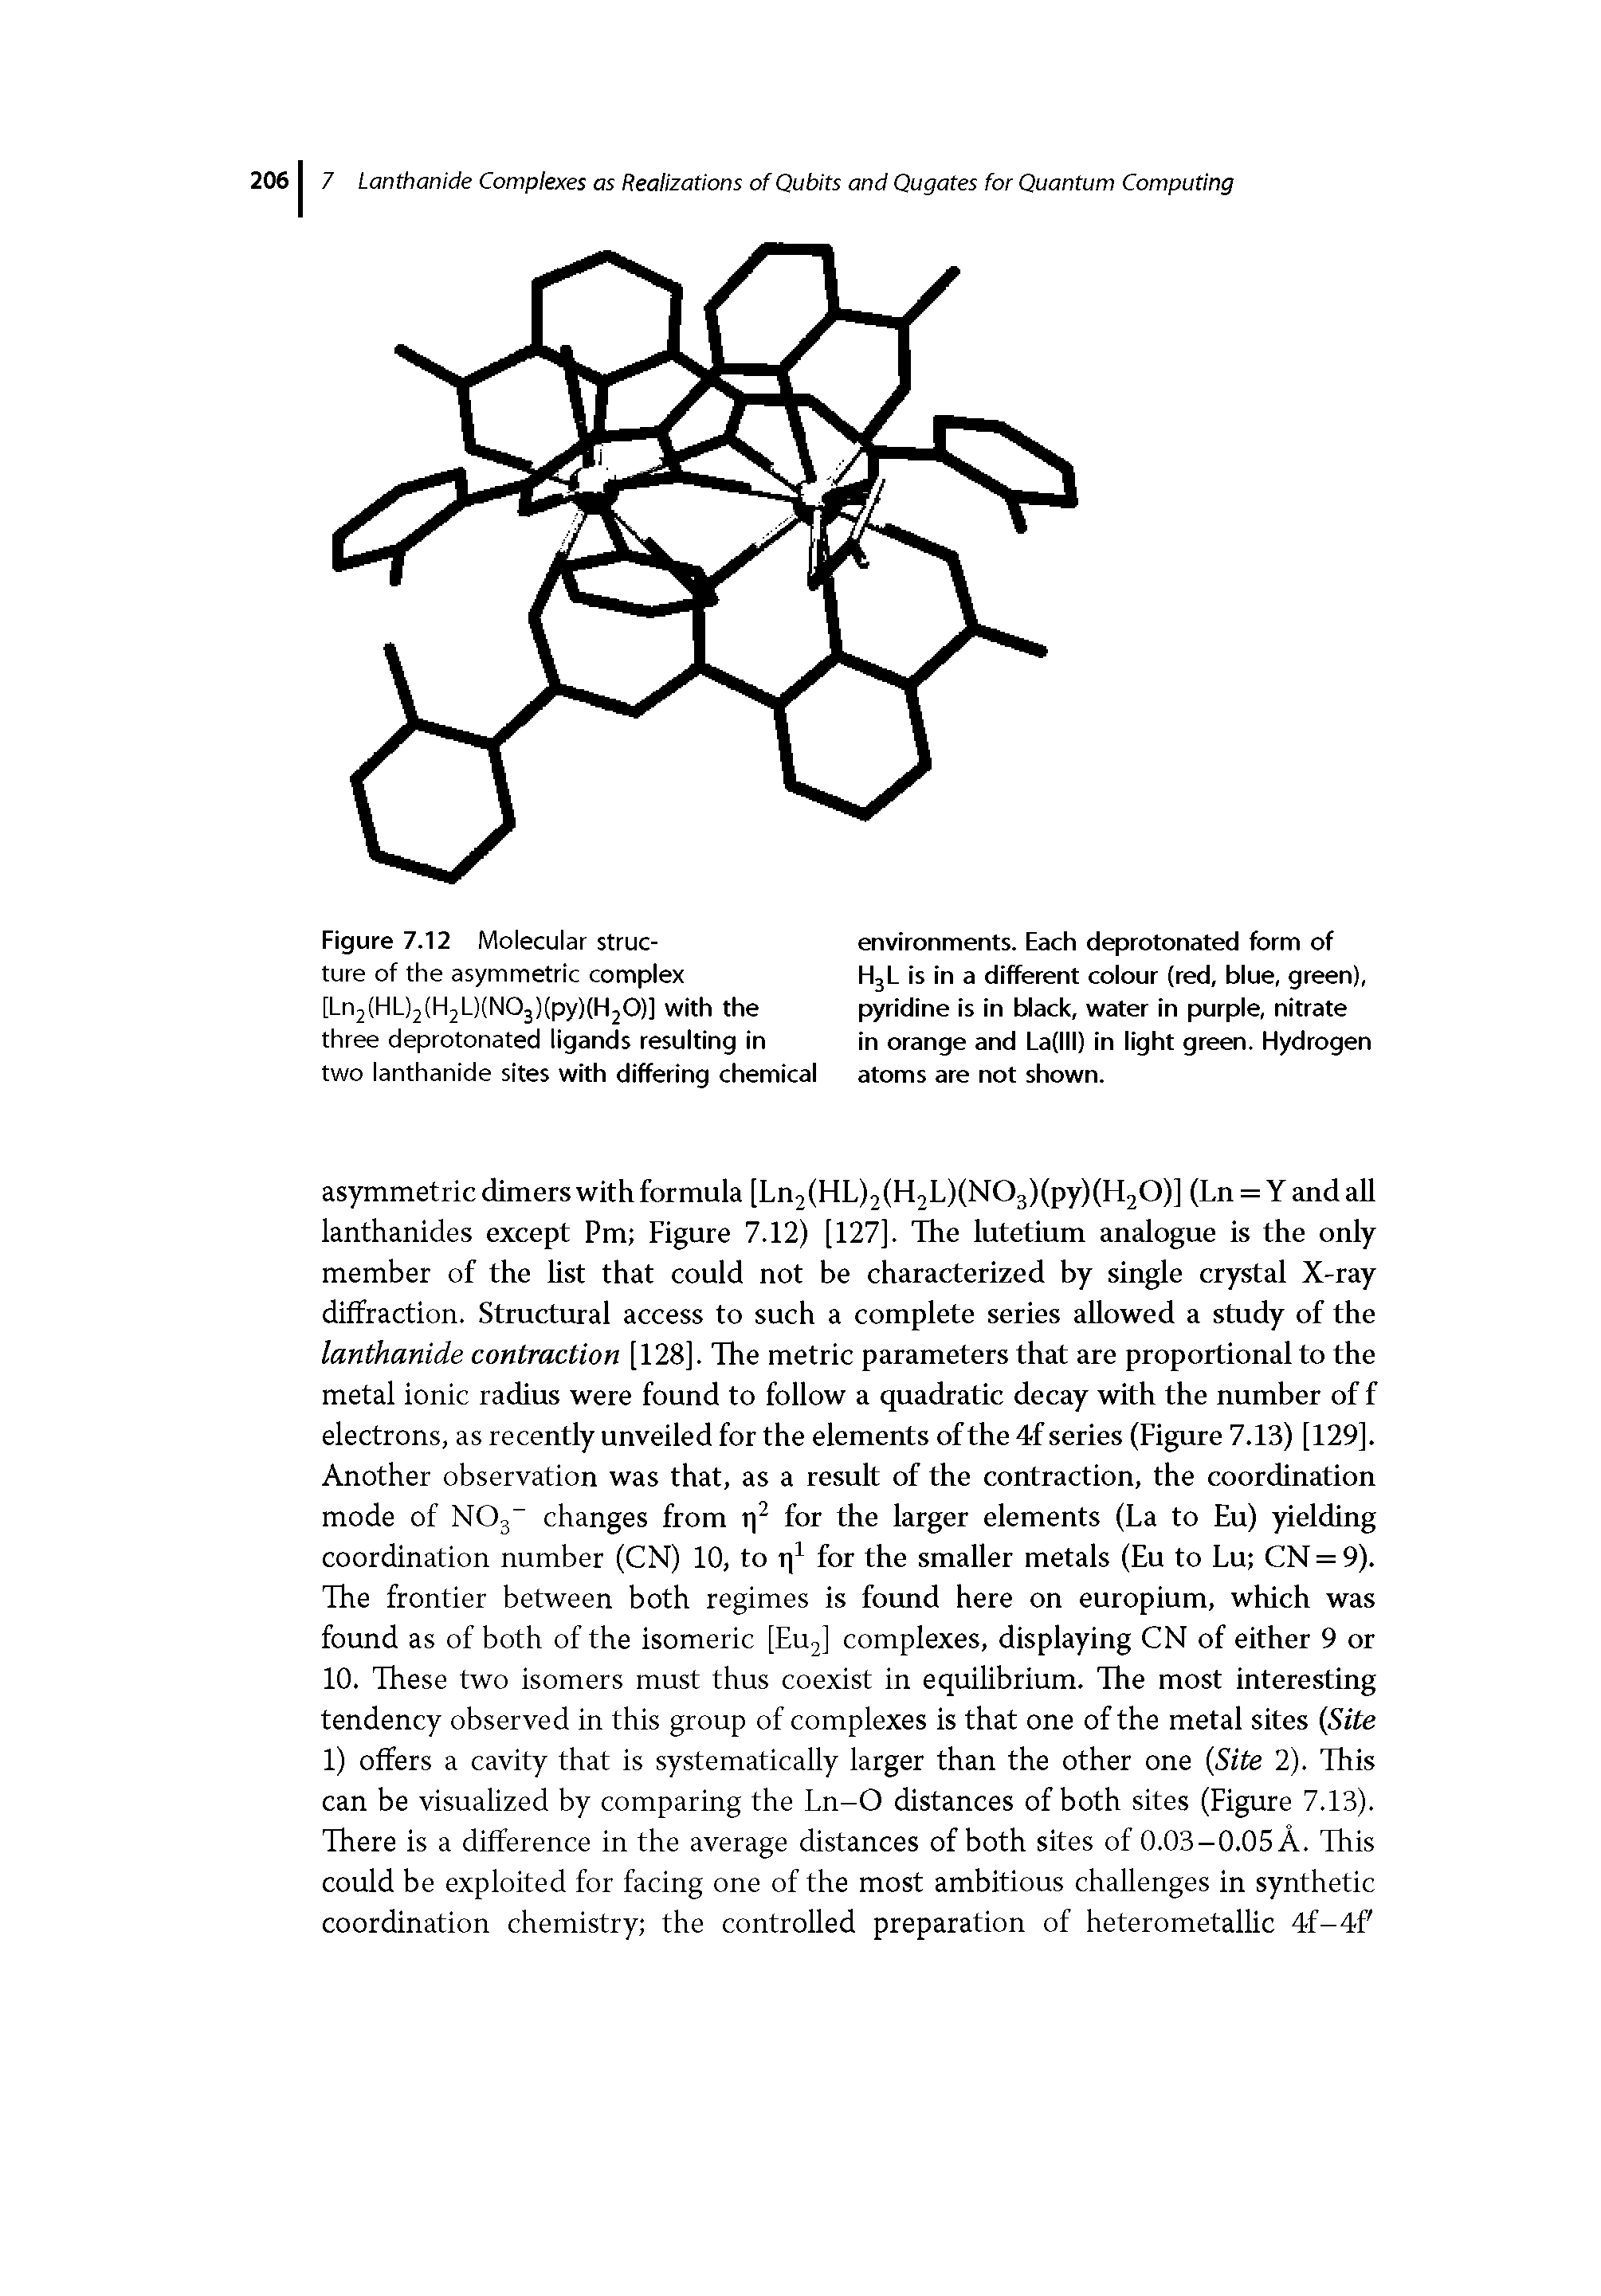 Figure 7.12 Molecular structure of the asymmetric complex [Ln2(HL)2(H2L)(N03)(py)(H20)] with the three deprotonated ligands resulting in two lanthanide sites with differing chemical...